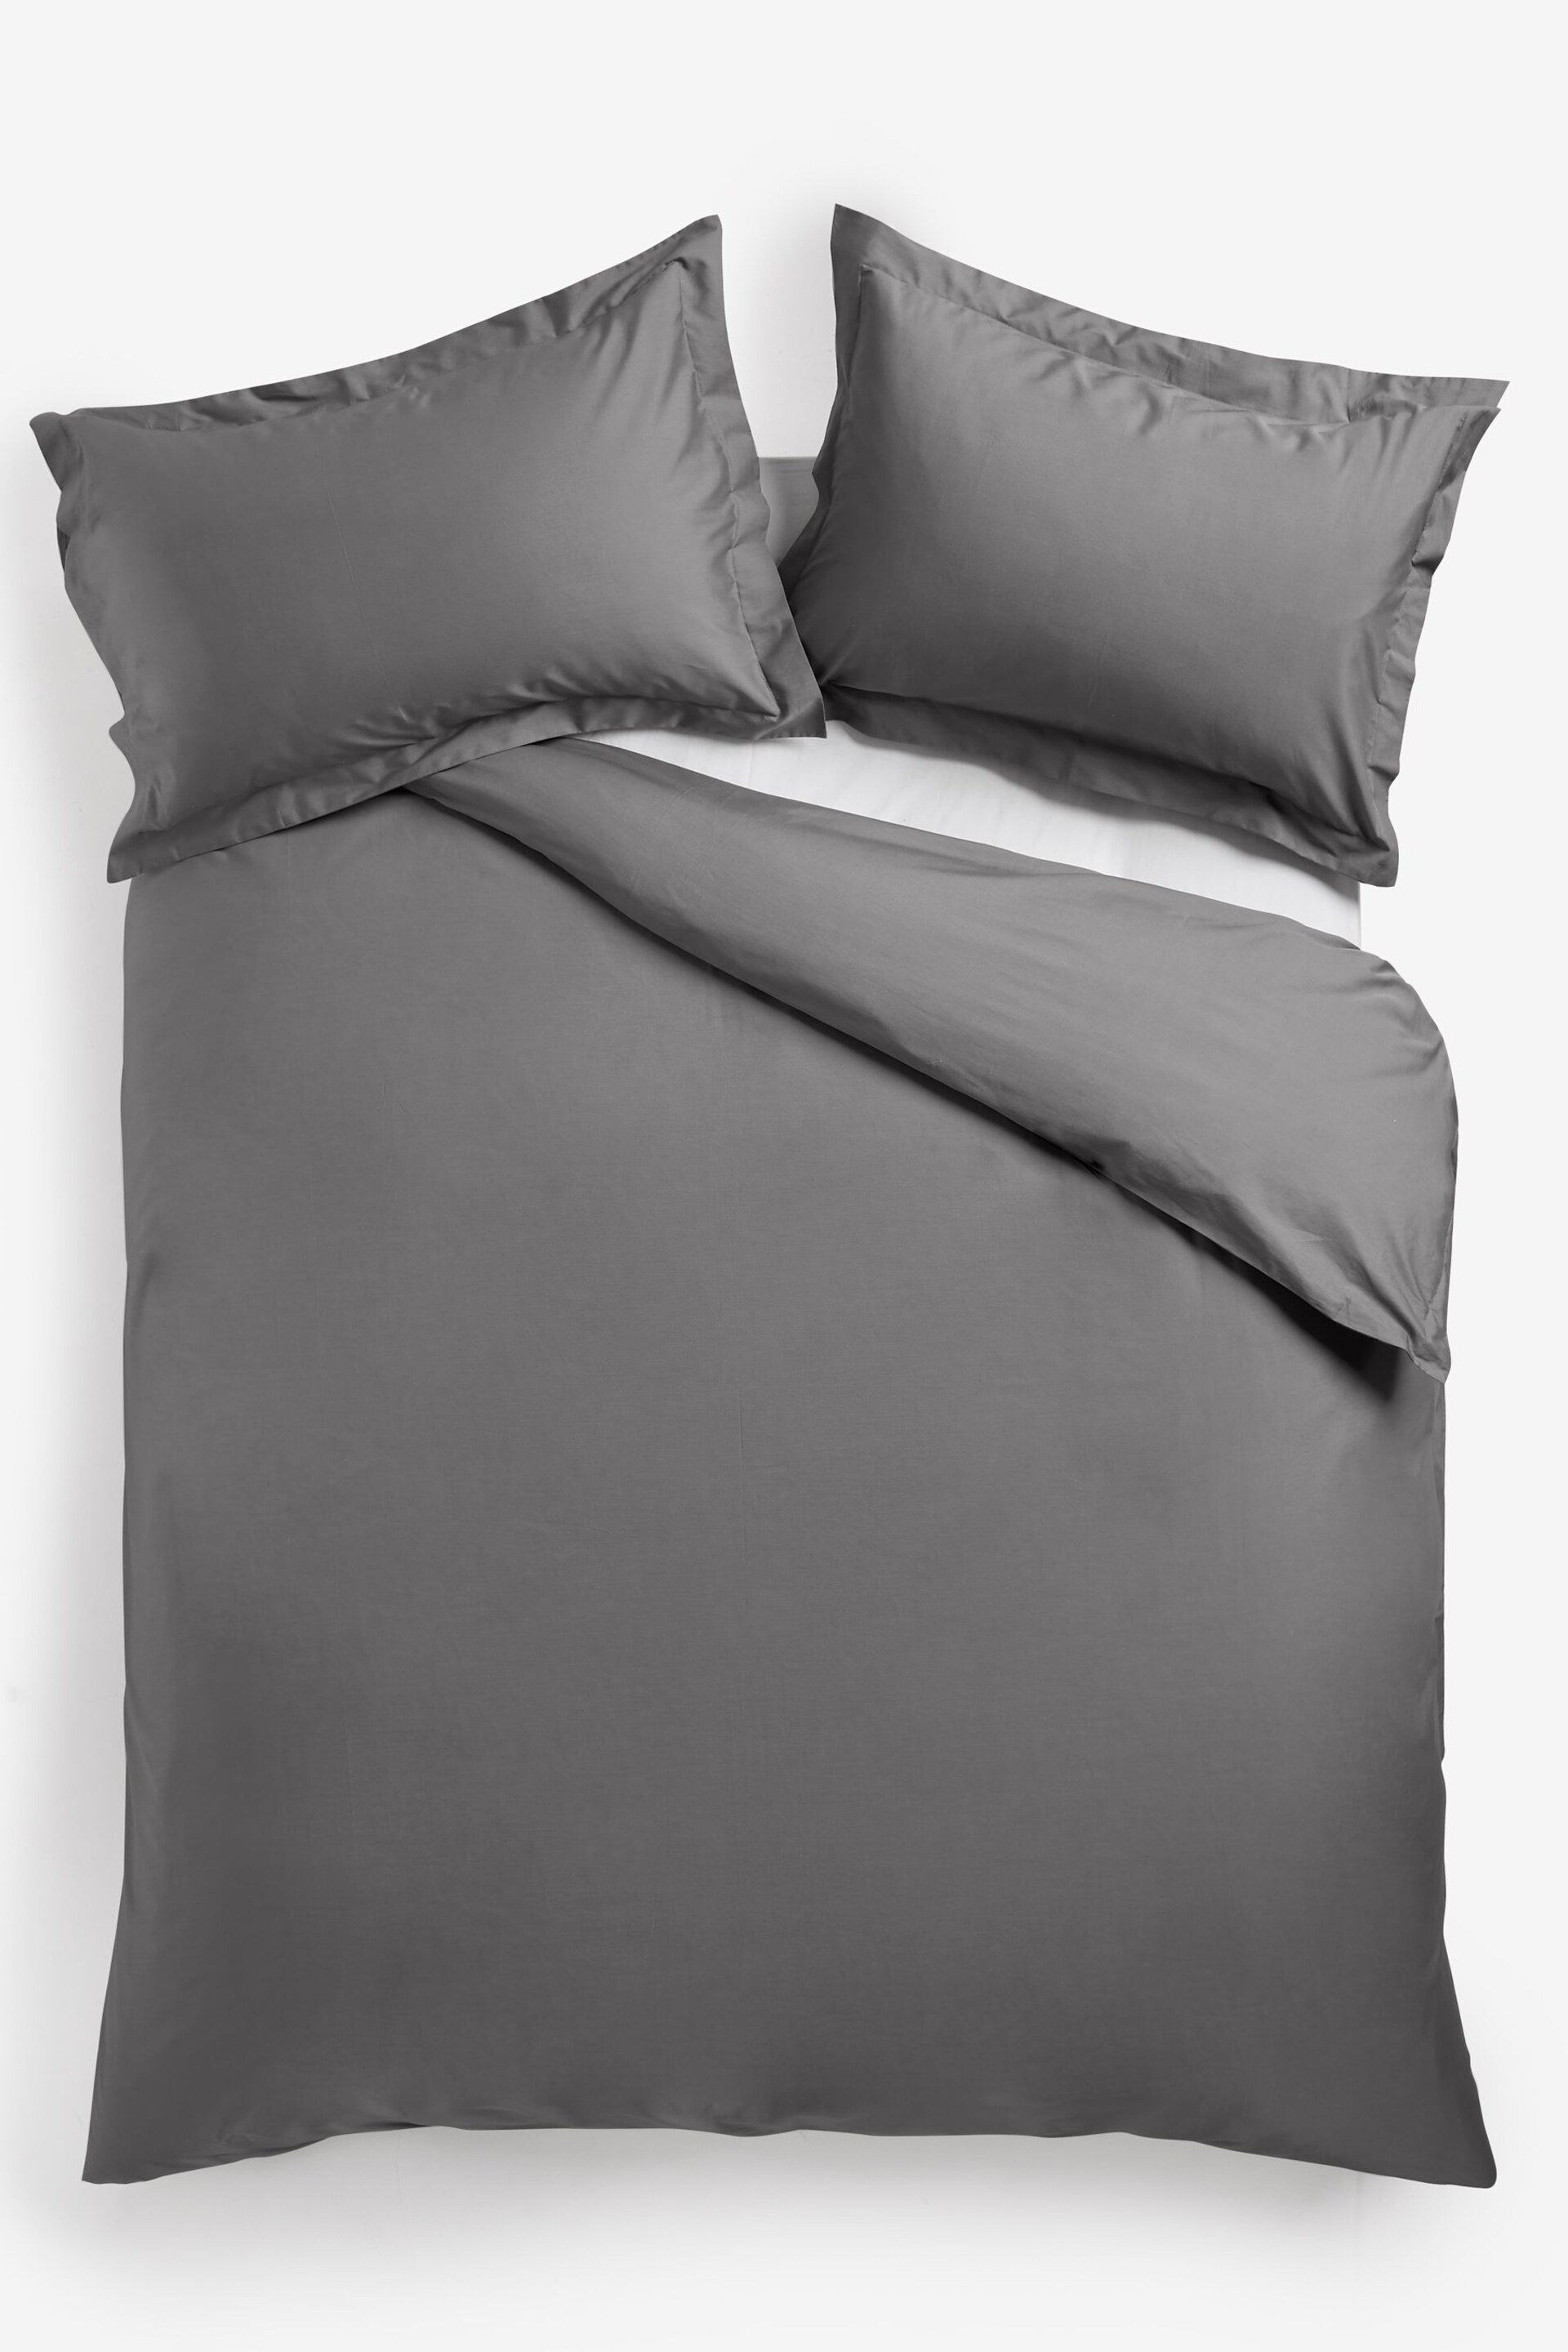 Charcoal Grey Oxford Edge Cotton Rich Oxford Duvet Cover and Pillowcase Set - Image 2 of 4